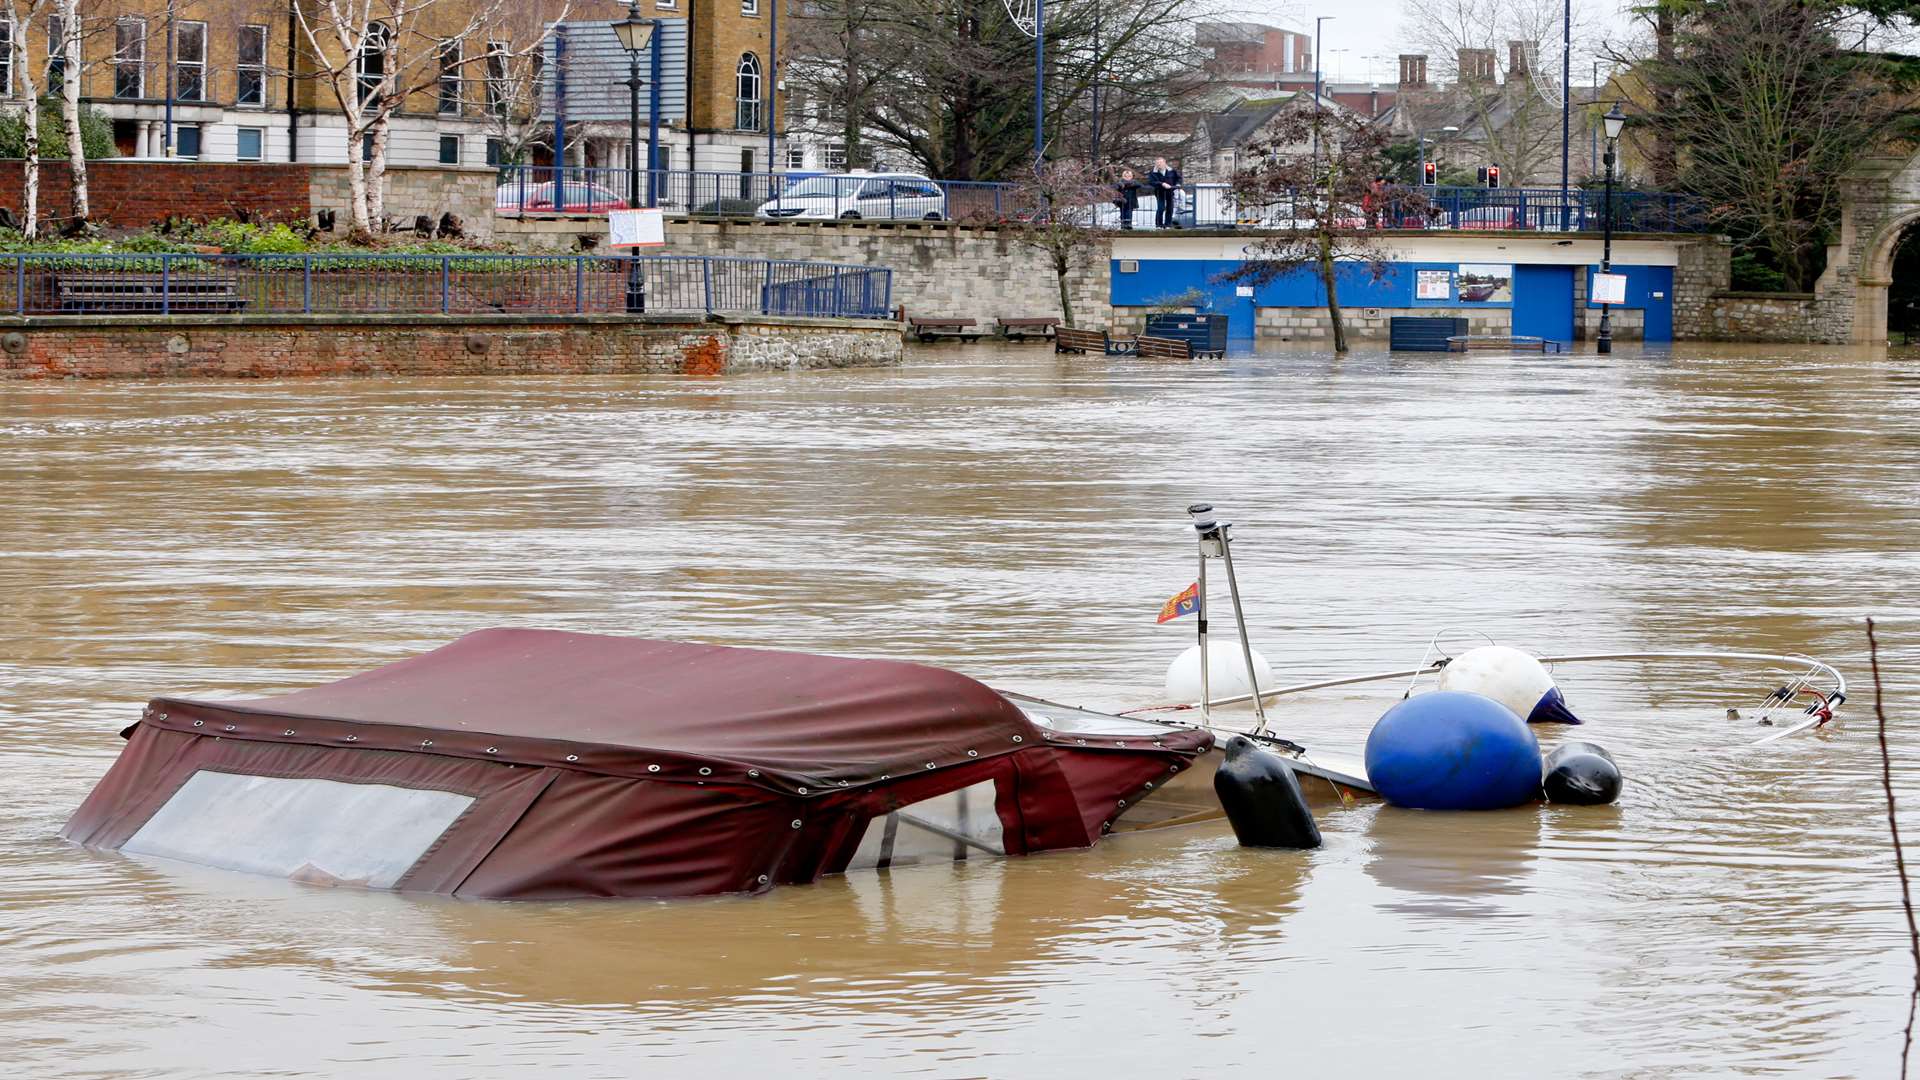 A submerged boat on the swollen River Medway